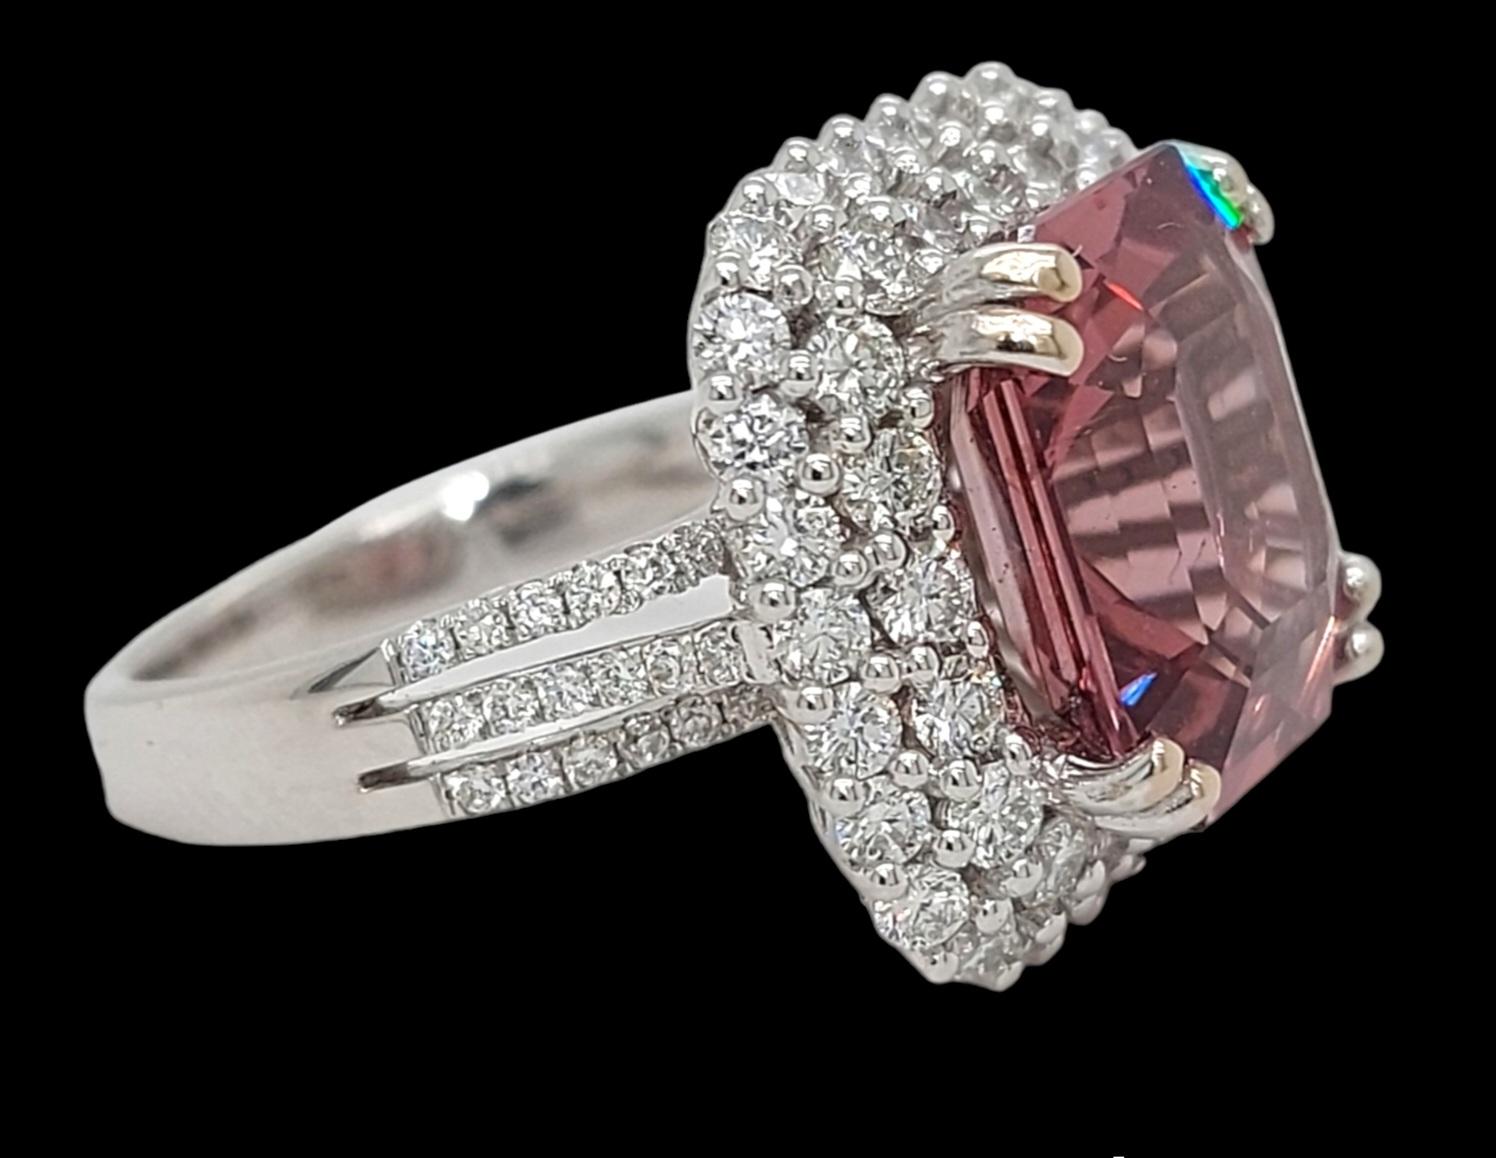 Magnificat 18kt White Gold Ring with Burmese No Heat 7.52ct Spinel and 2ct. Diamonds

Spinel: Natural Spinel Step cut, octagonal shape, orange pink colour, No indications of treatment, 7.52 ct. 
Comes with a GRS certificate GRS2022-067664

Diamonds: